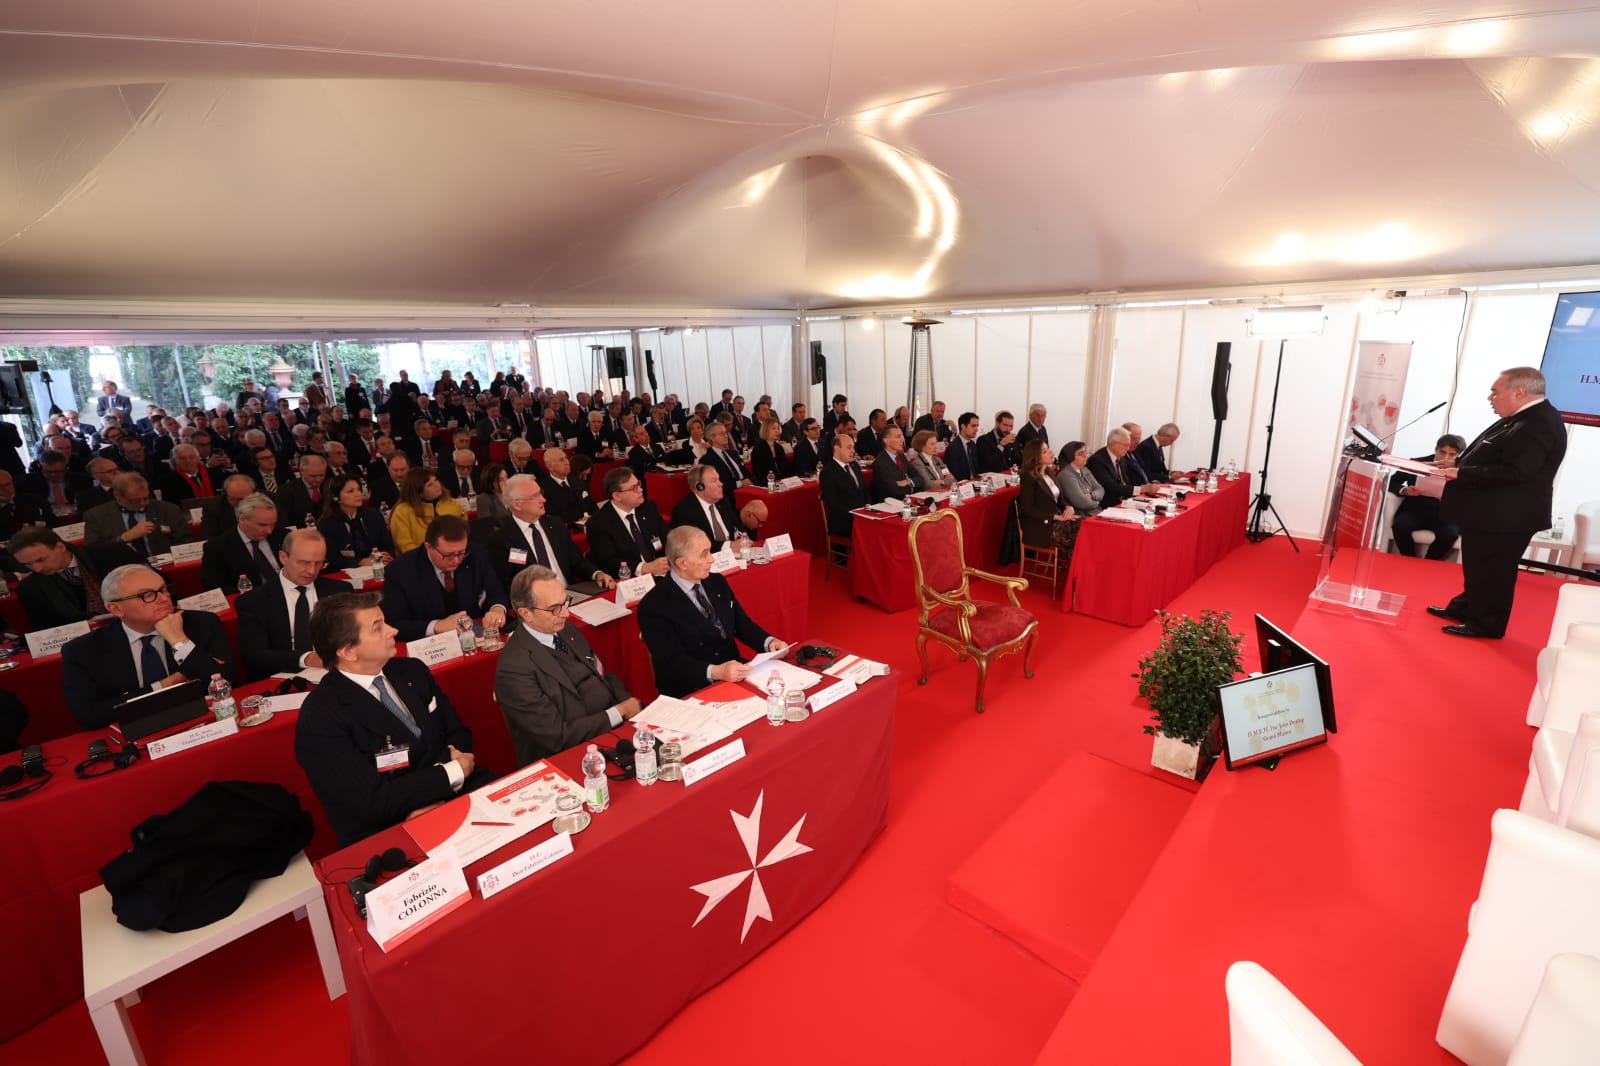 Conference of the Ambassadors of the Sovereign Order of Malta